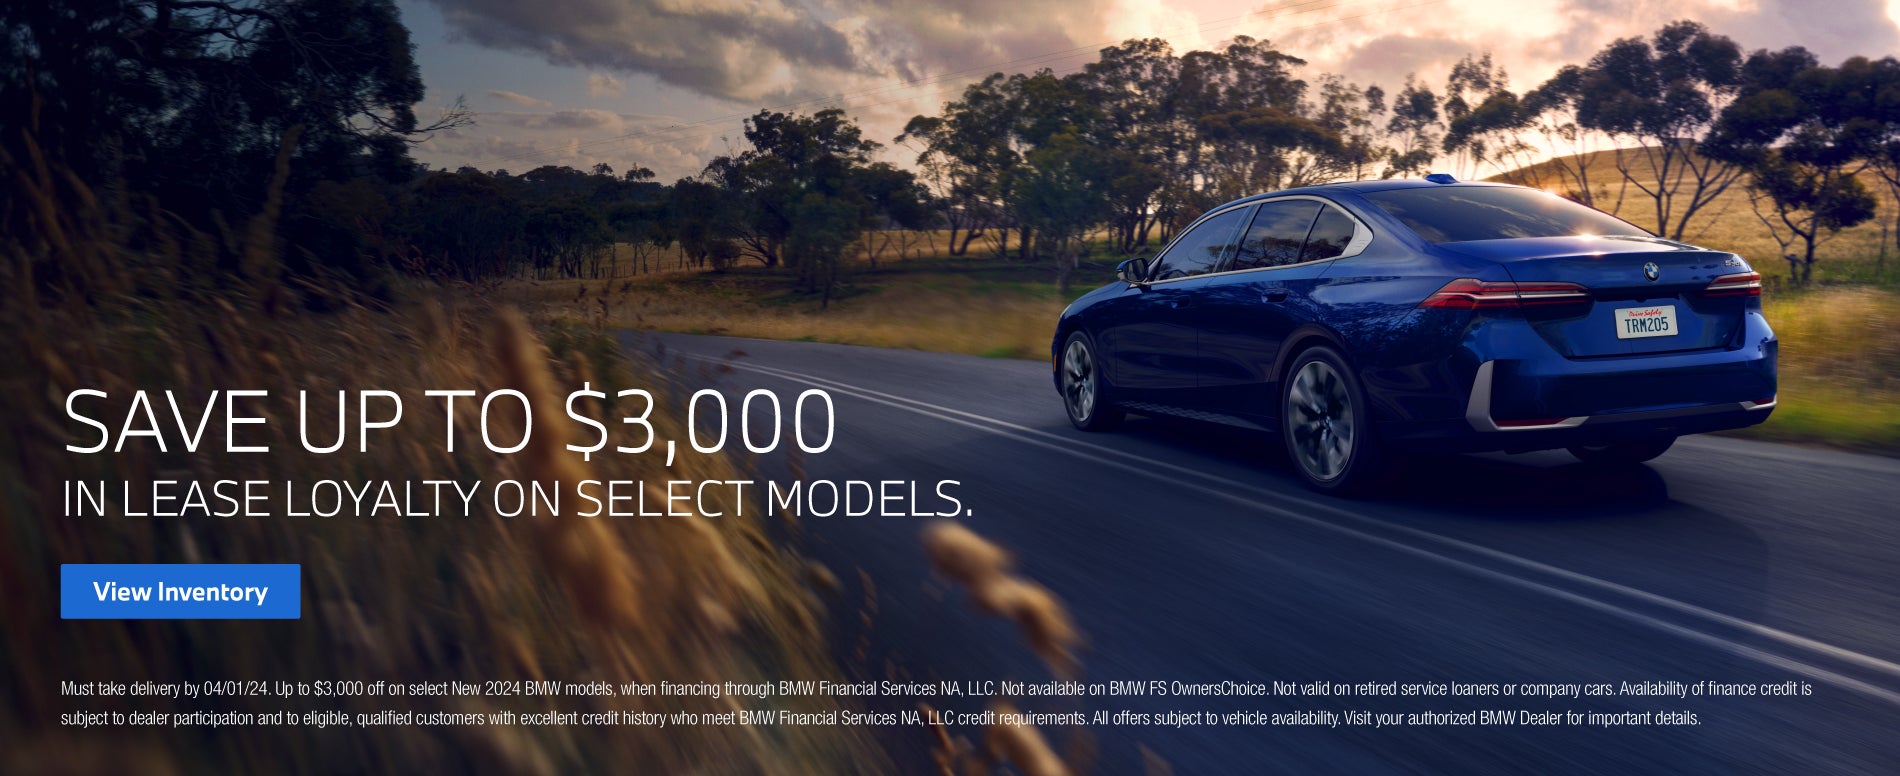 Save up to $3000 in lease loyalty on select models